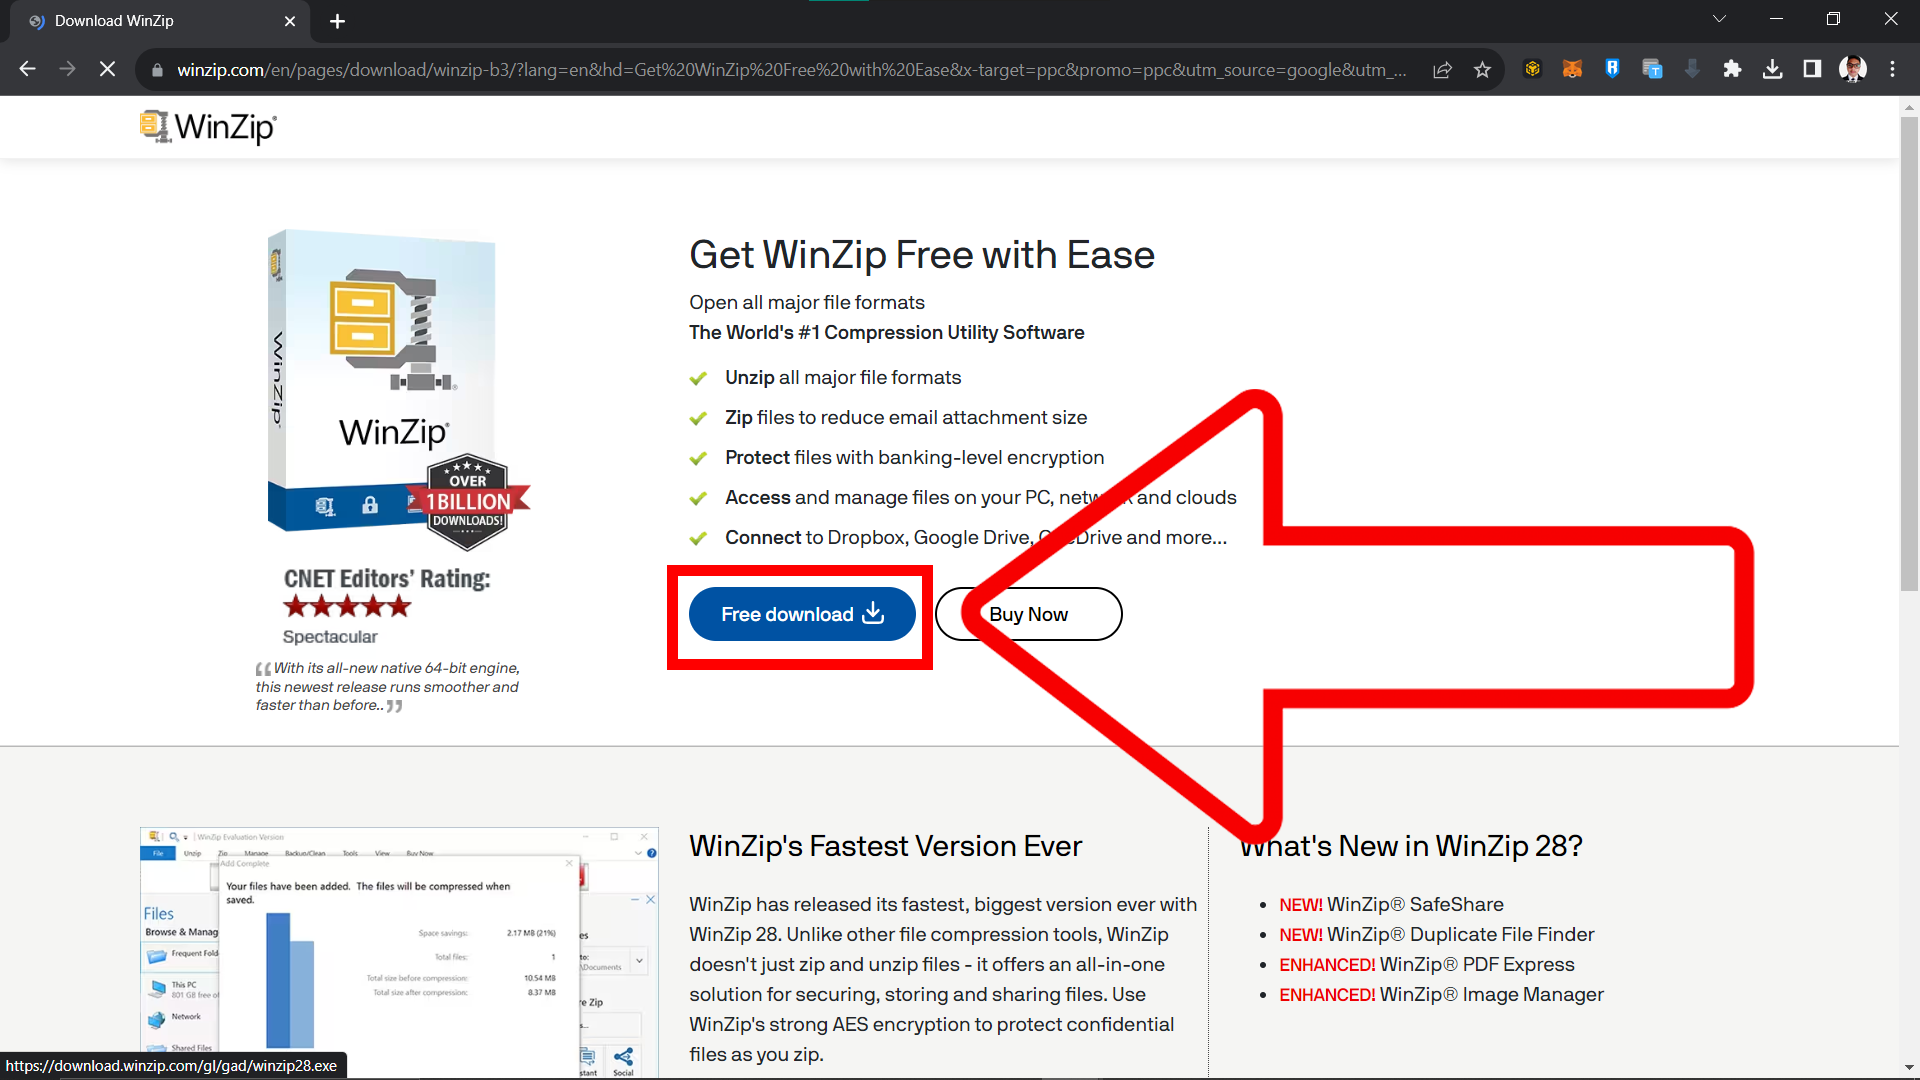 How To Download WinZip: Step 4